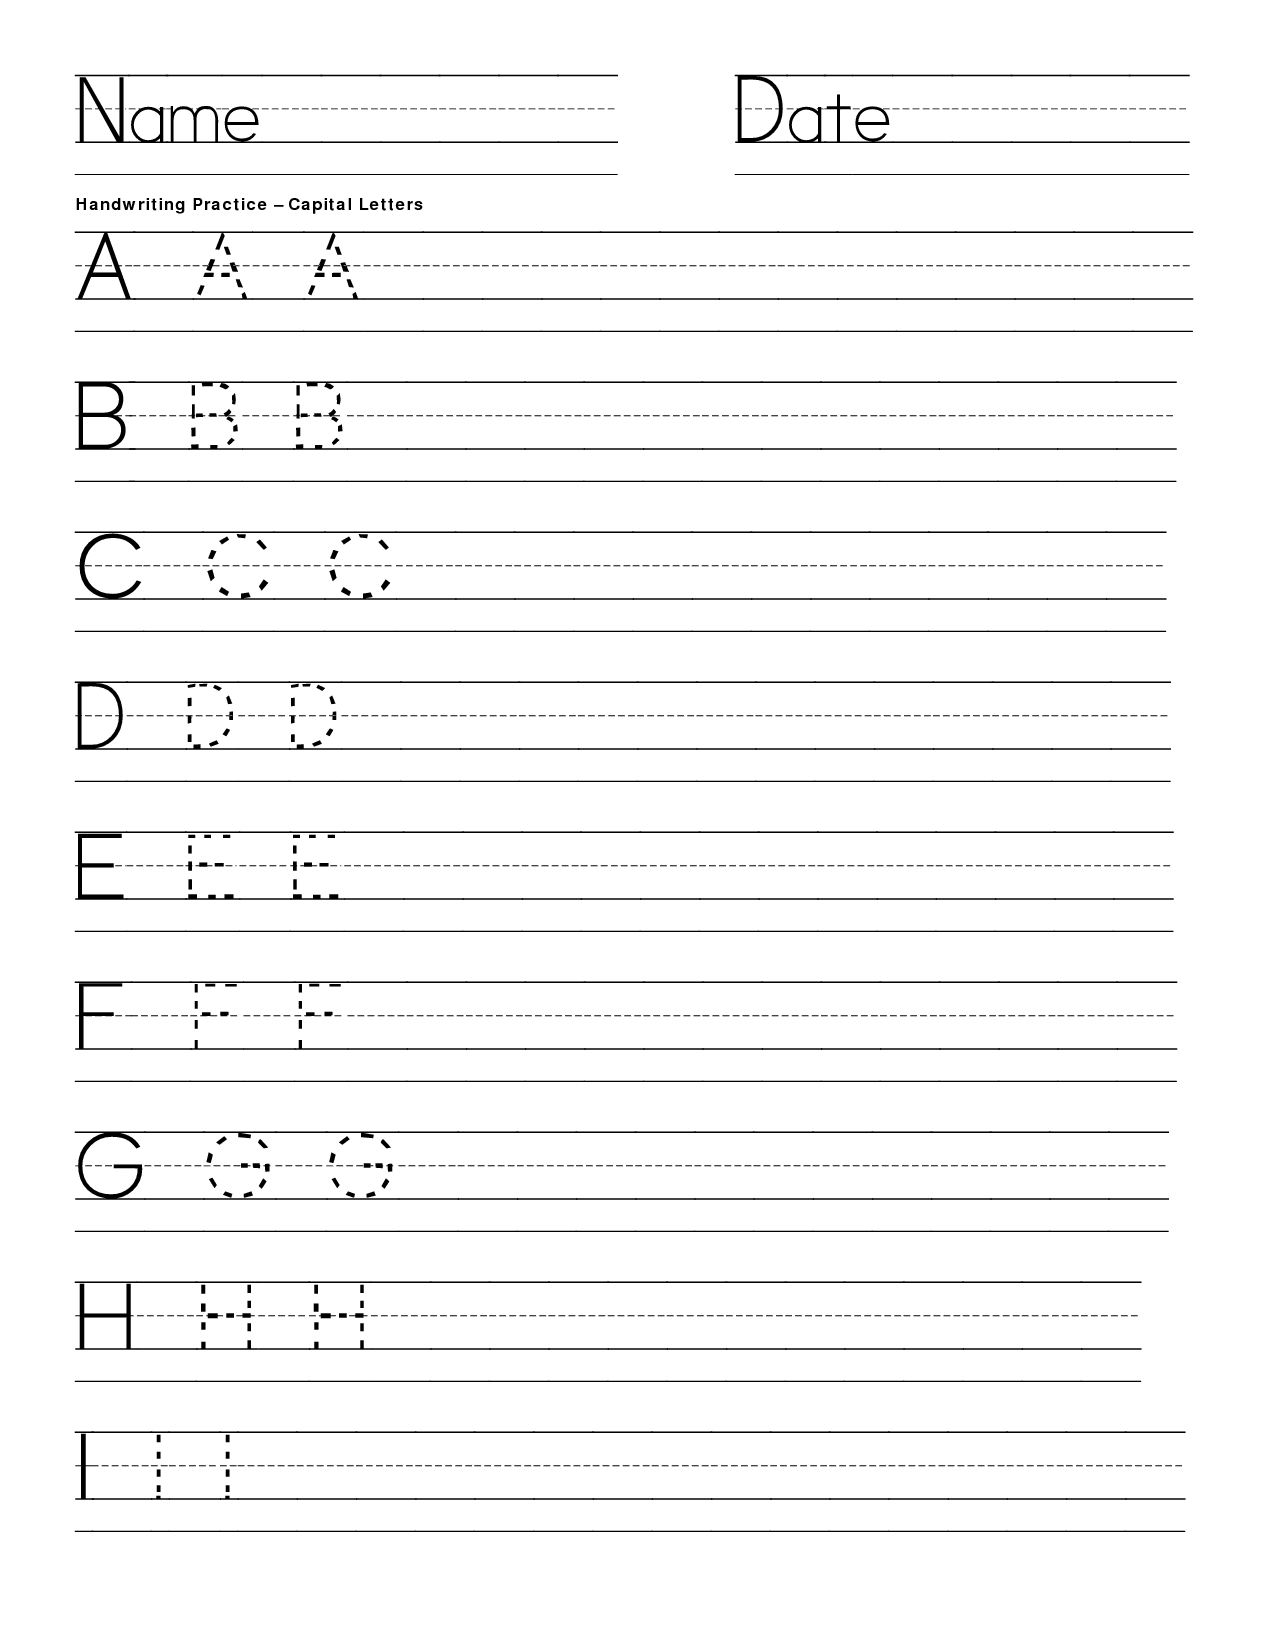 7-best-images-of-handwriting-practice-printables-letter-writing